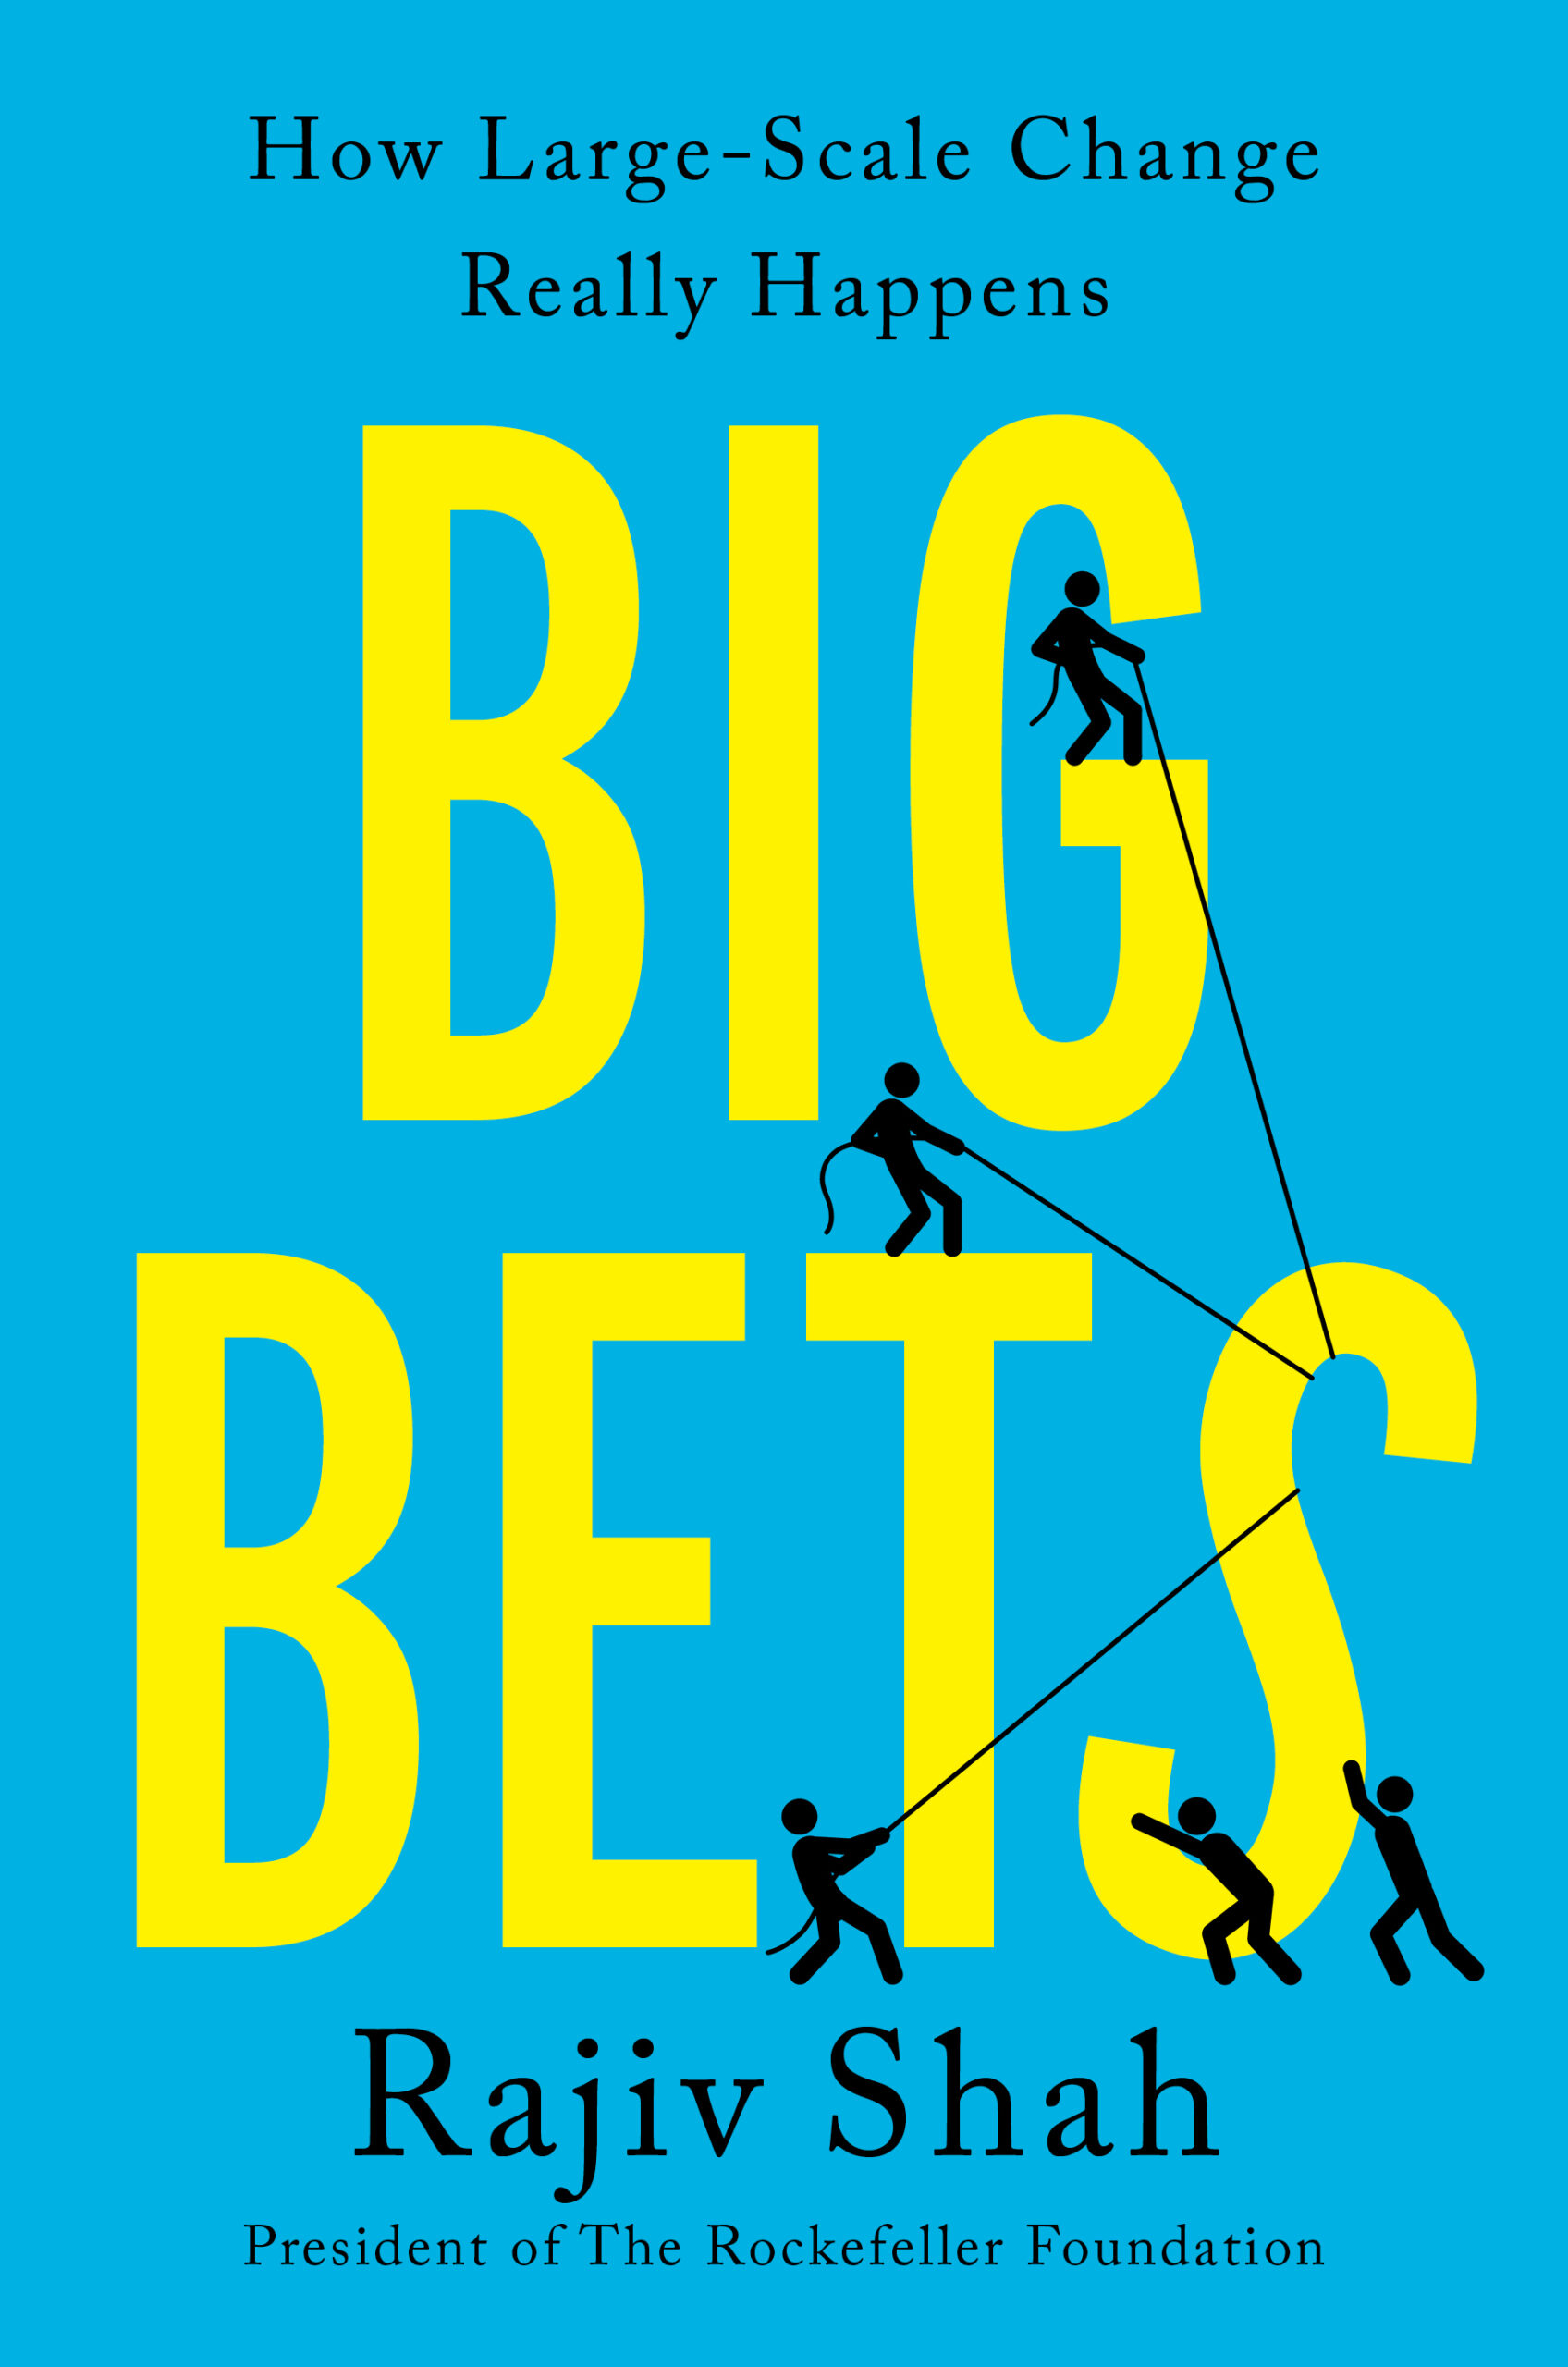 The cover of "Big Bets" which is light blue with yellow lettering.